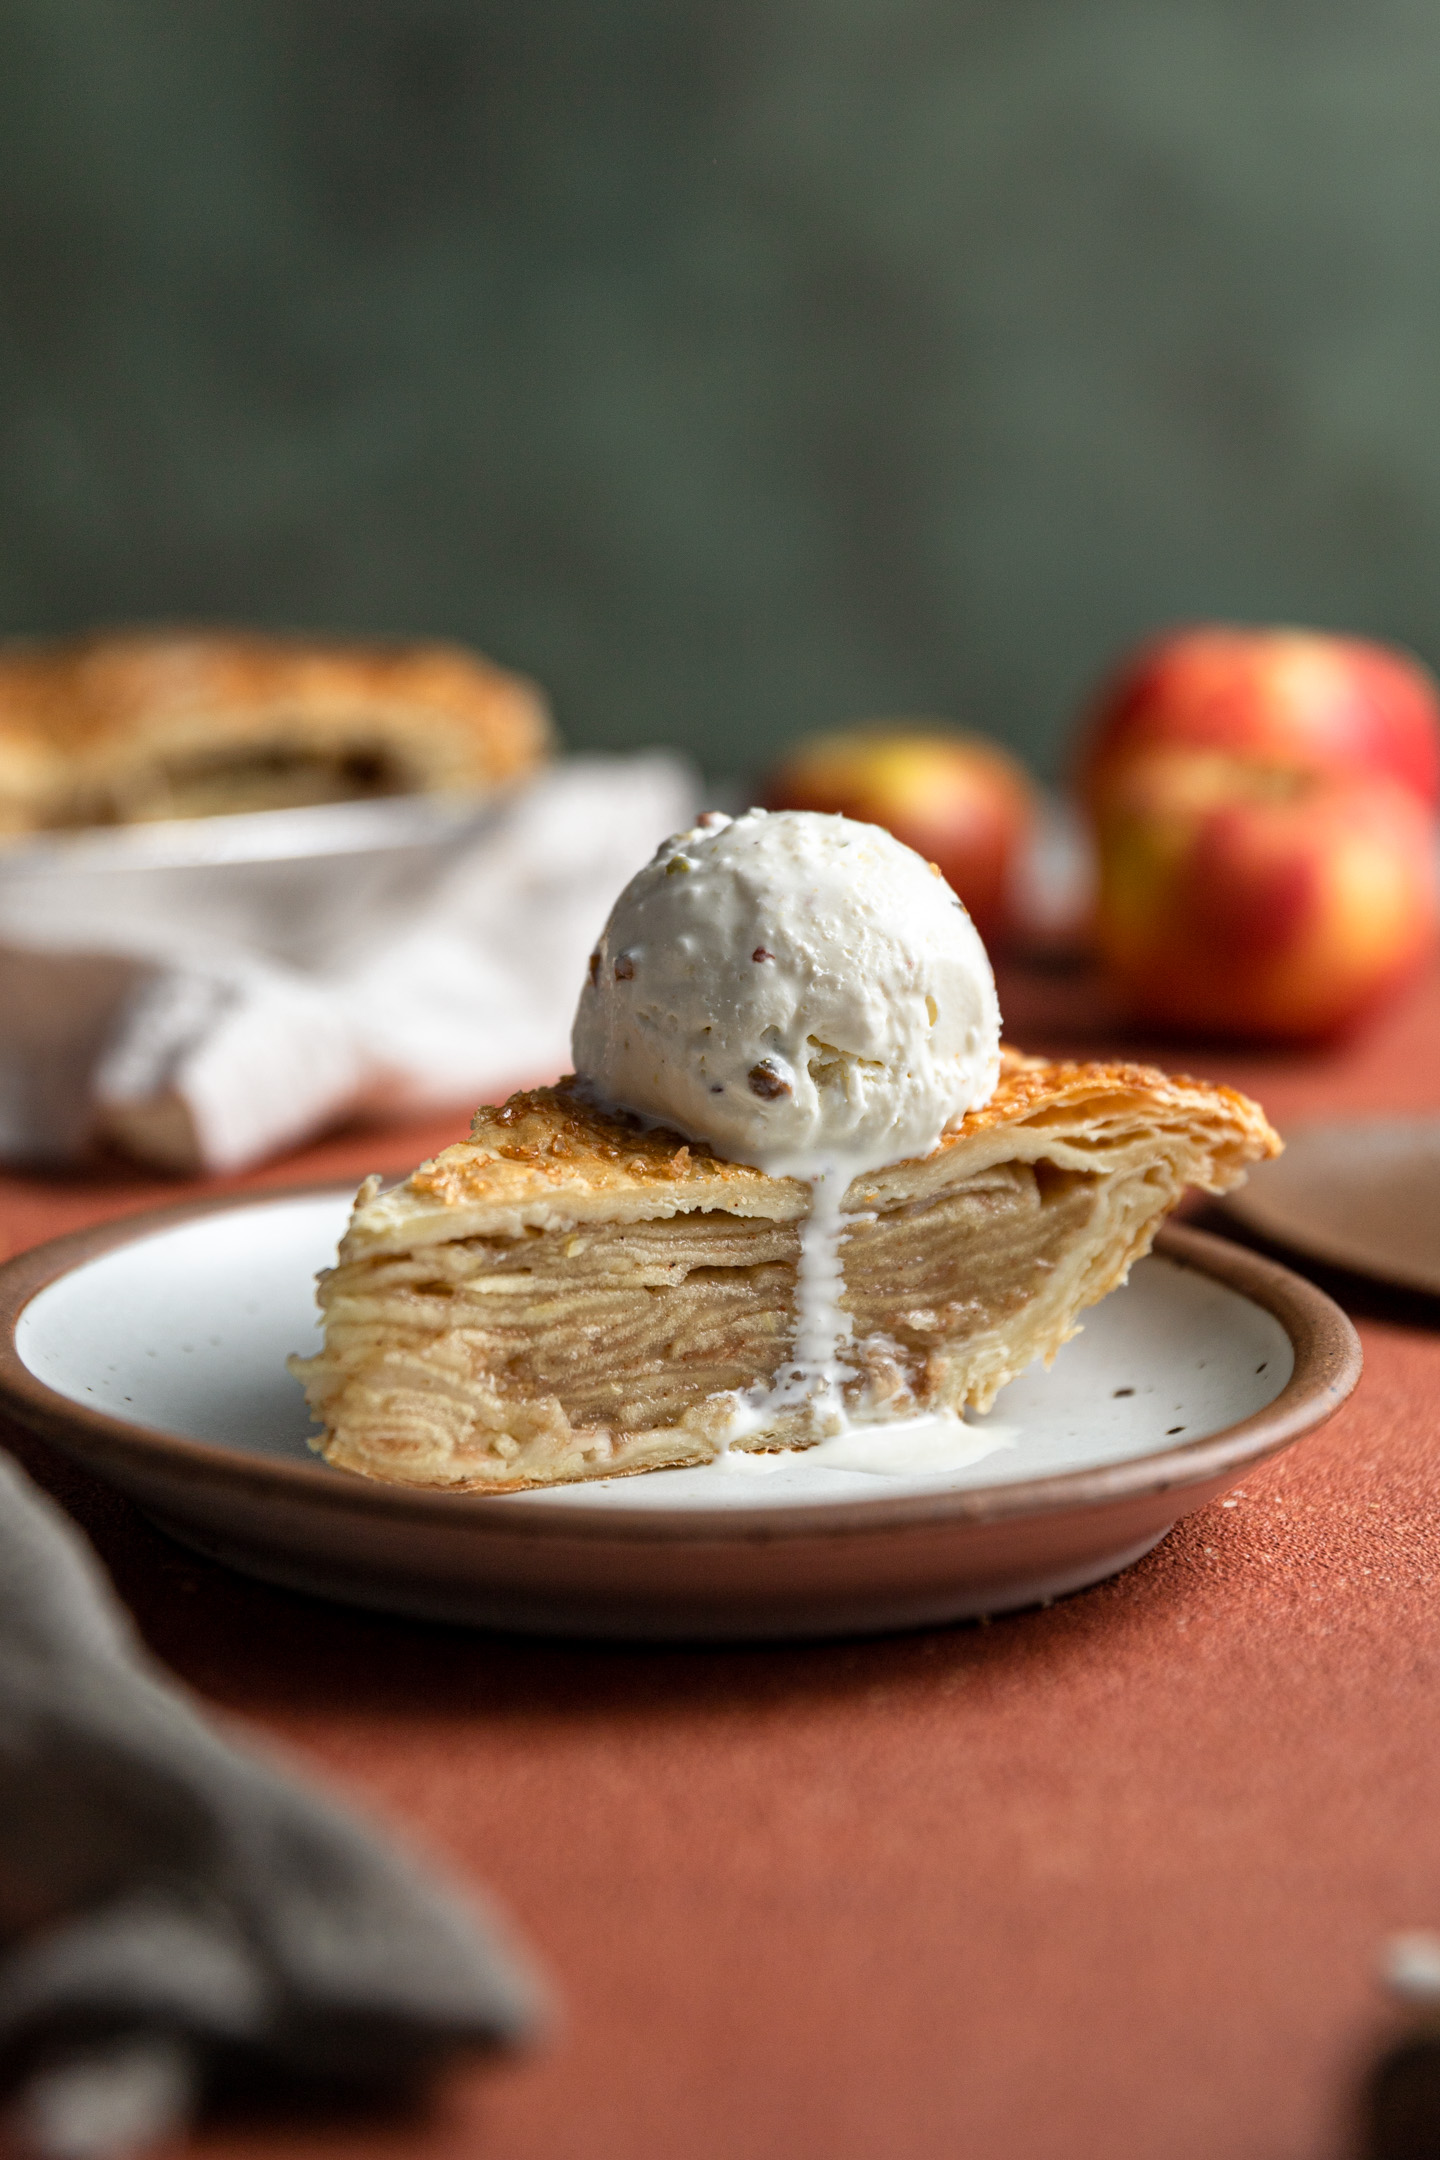 A slice of apple pie made with puff pastry with a scoop of ice cream on top.